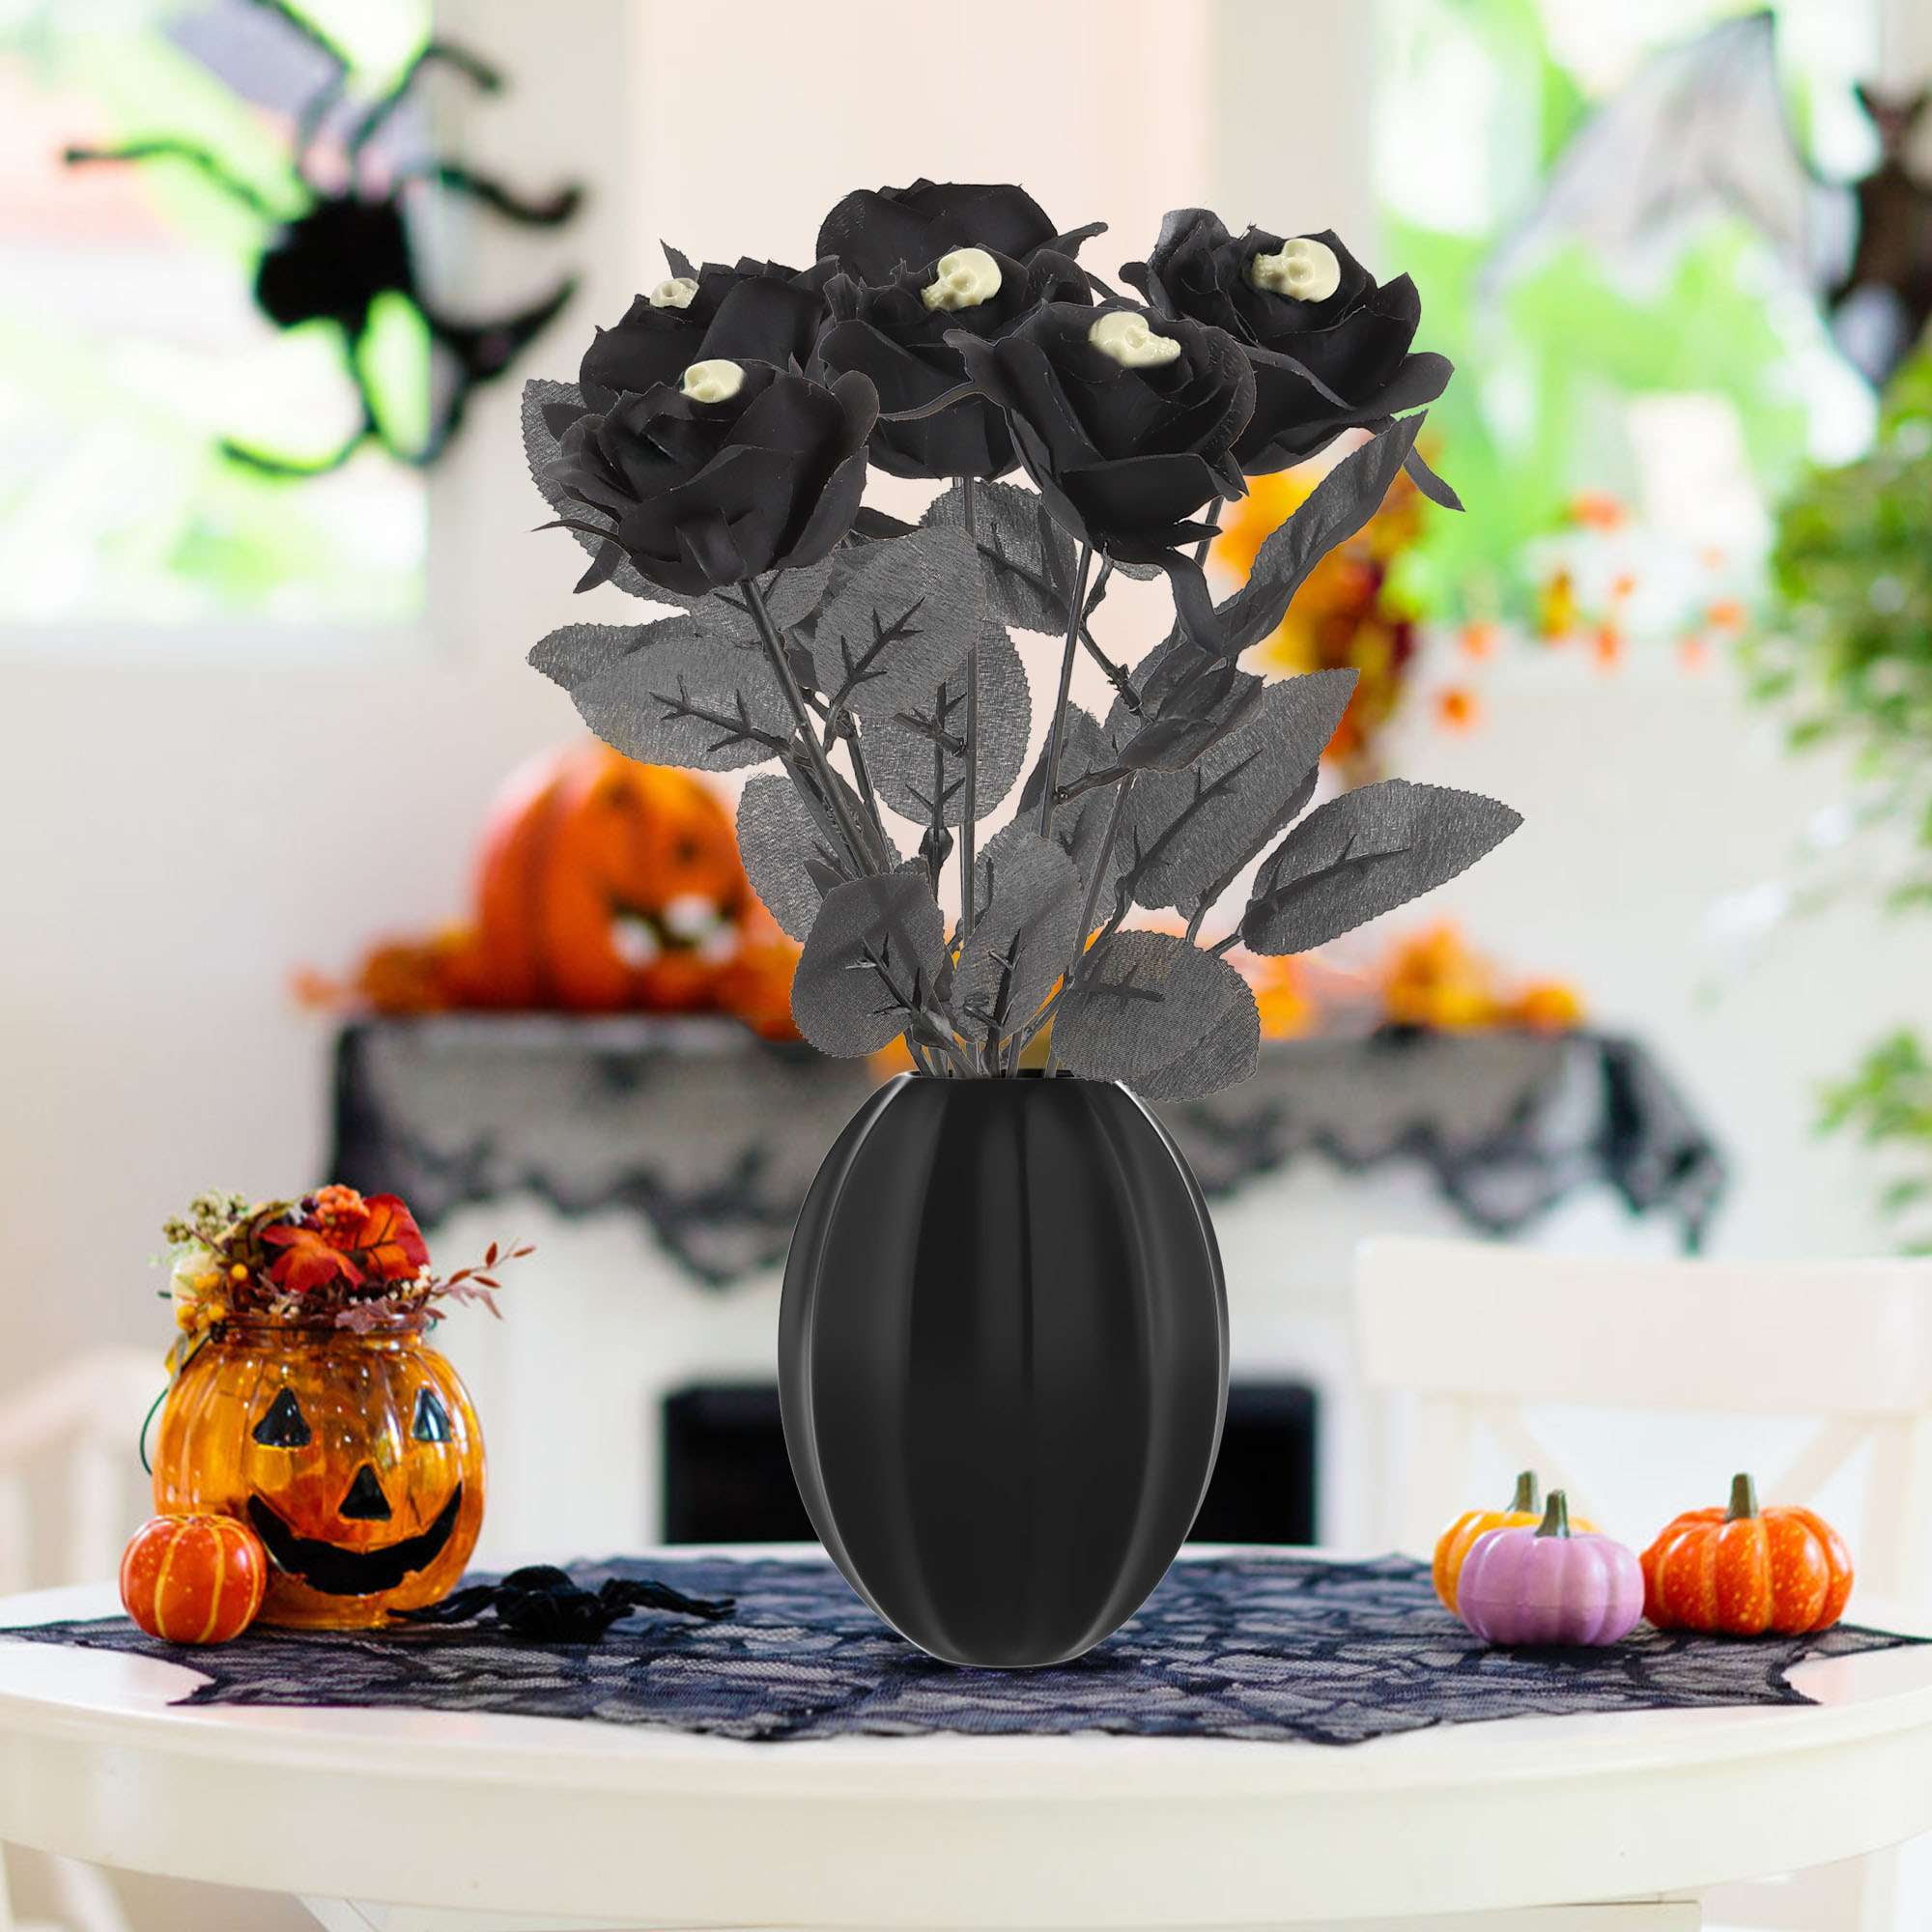 Yebazy 10pack Black Artificial Silk Roses Flowers Fake Silk Rose Bouquets  for Wedding Party Home Decorations Halloween Decoration